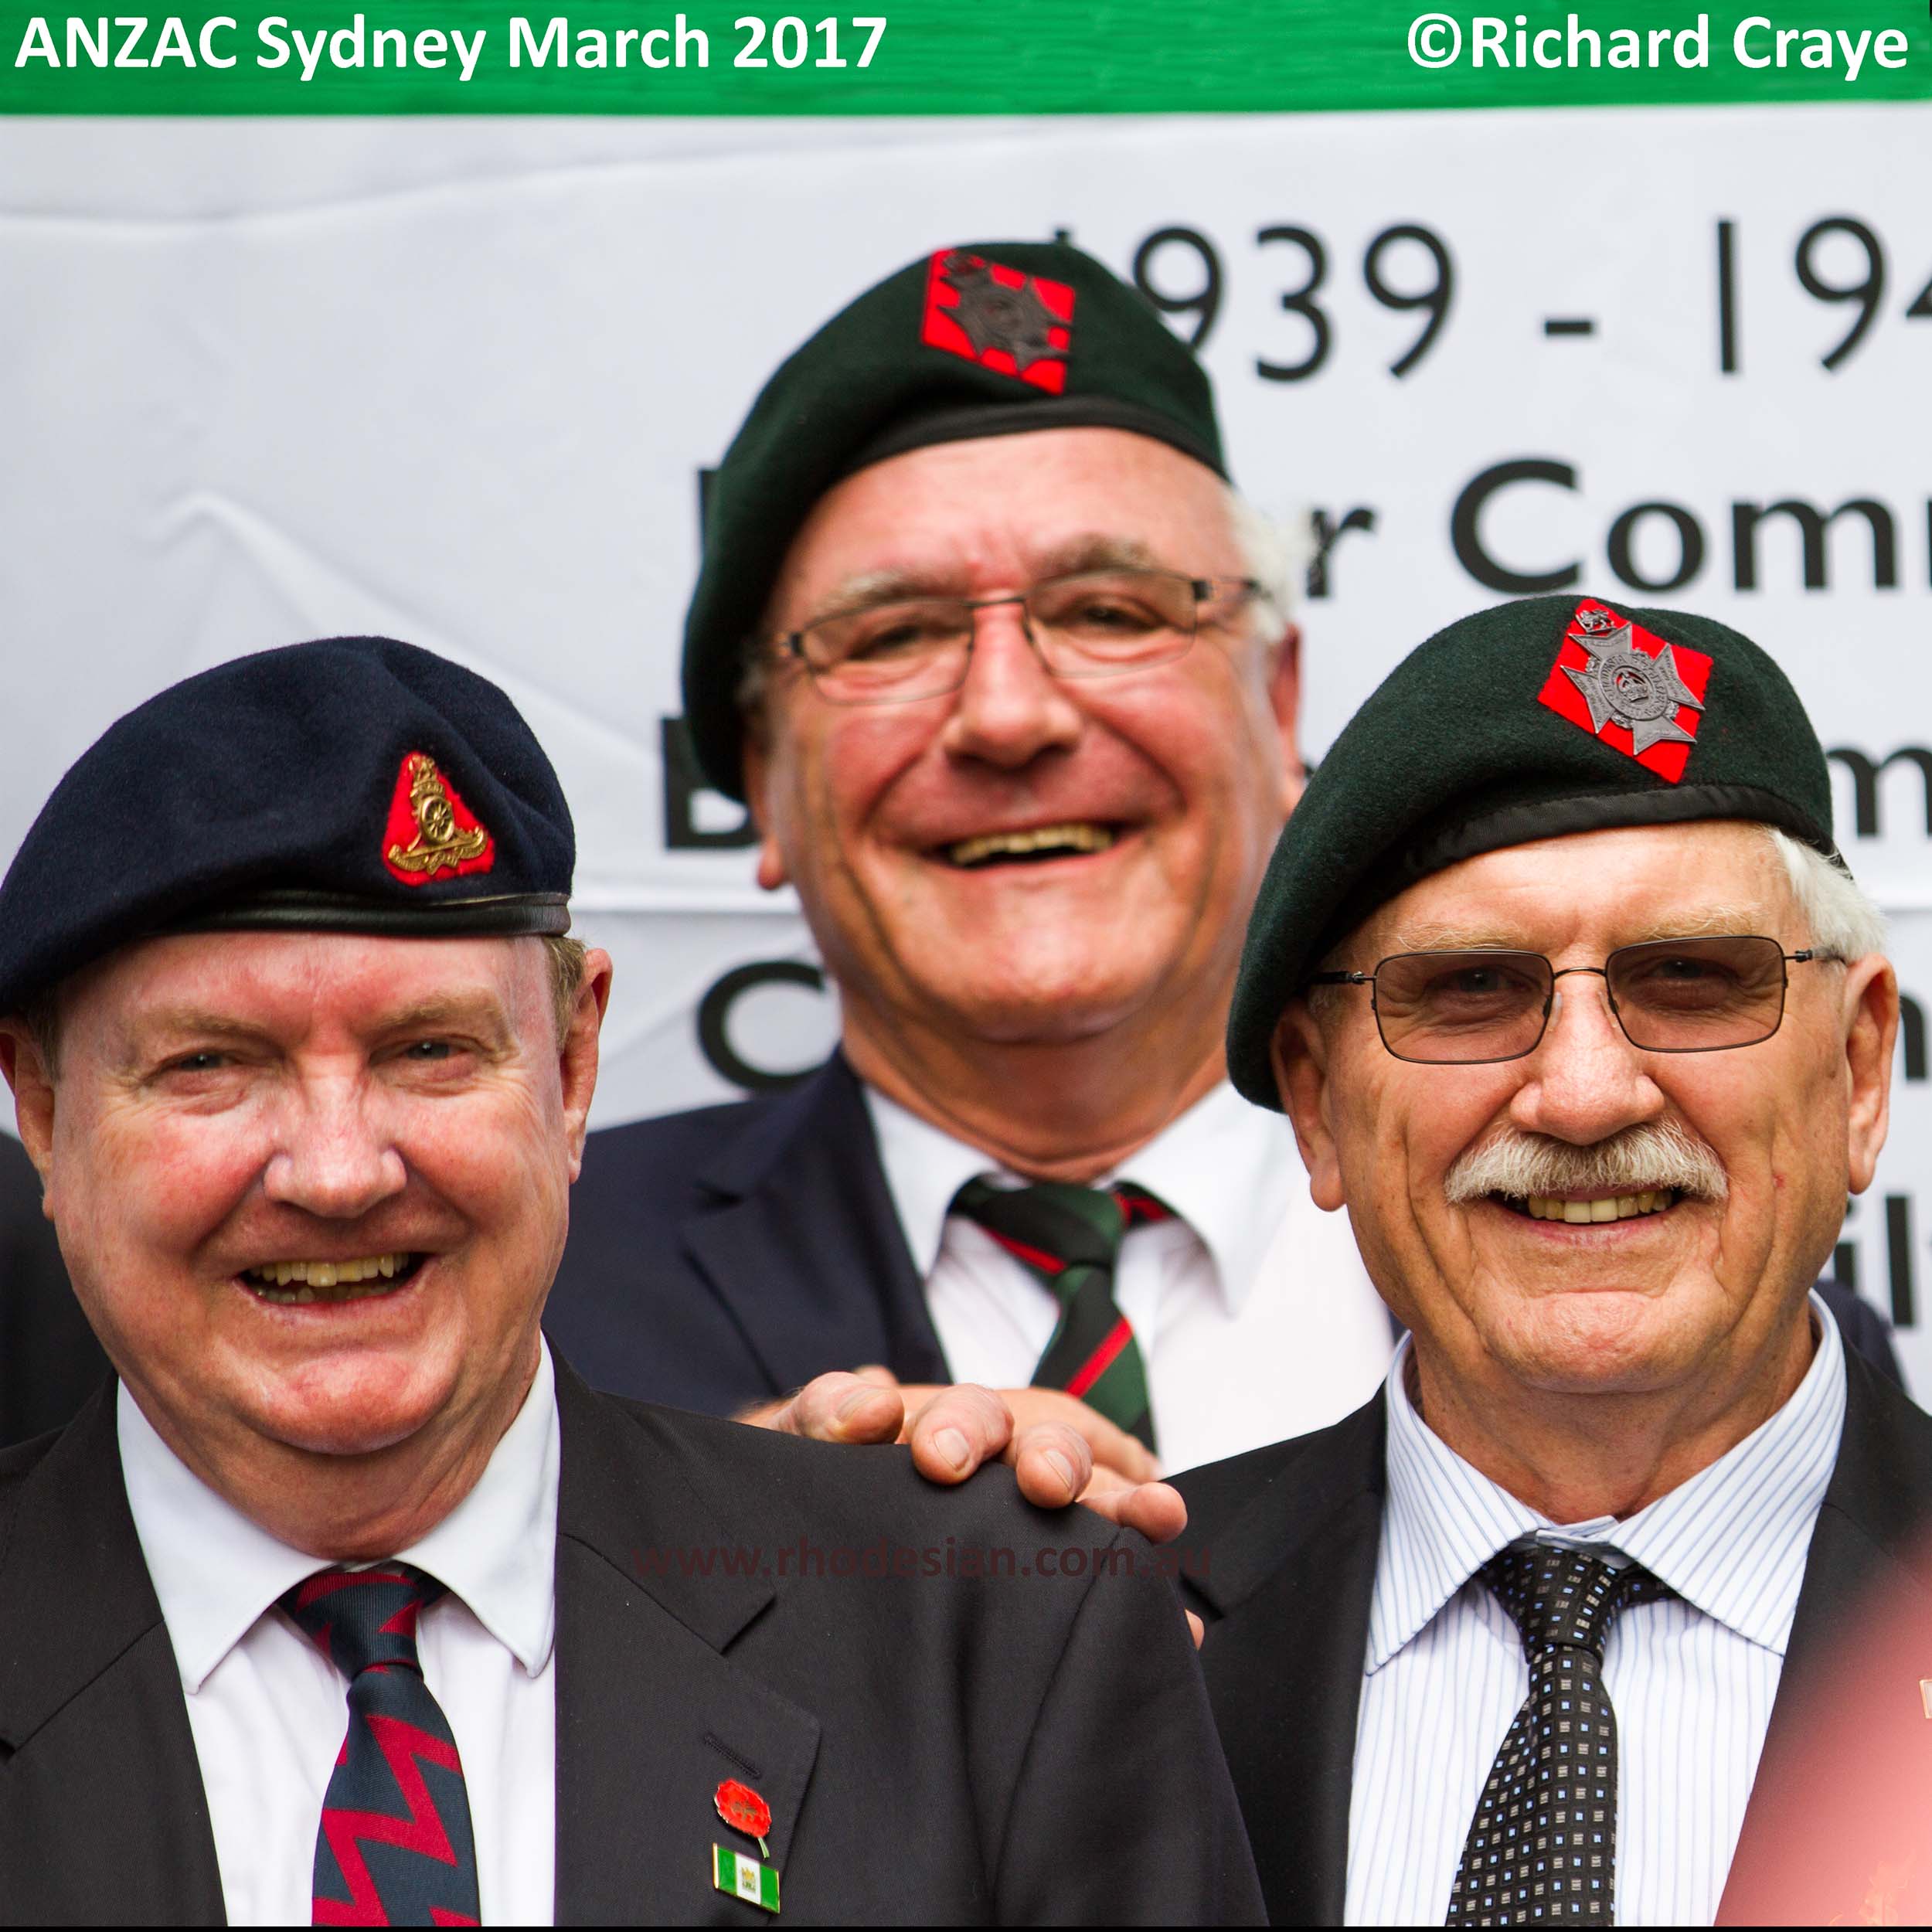 Rhodesian veterans after ANZAC Day March in Sydney in 2107 photo by Richard Craye